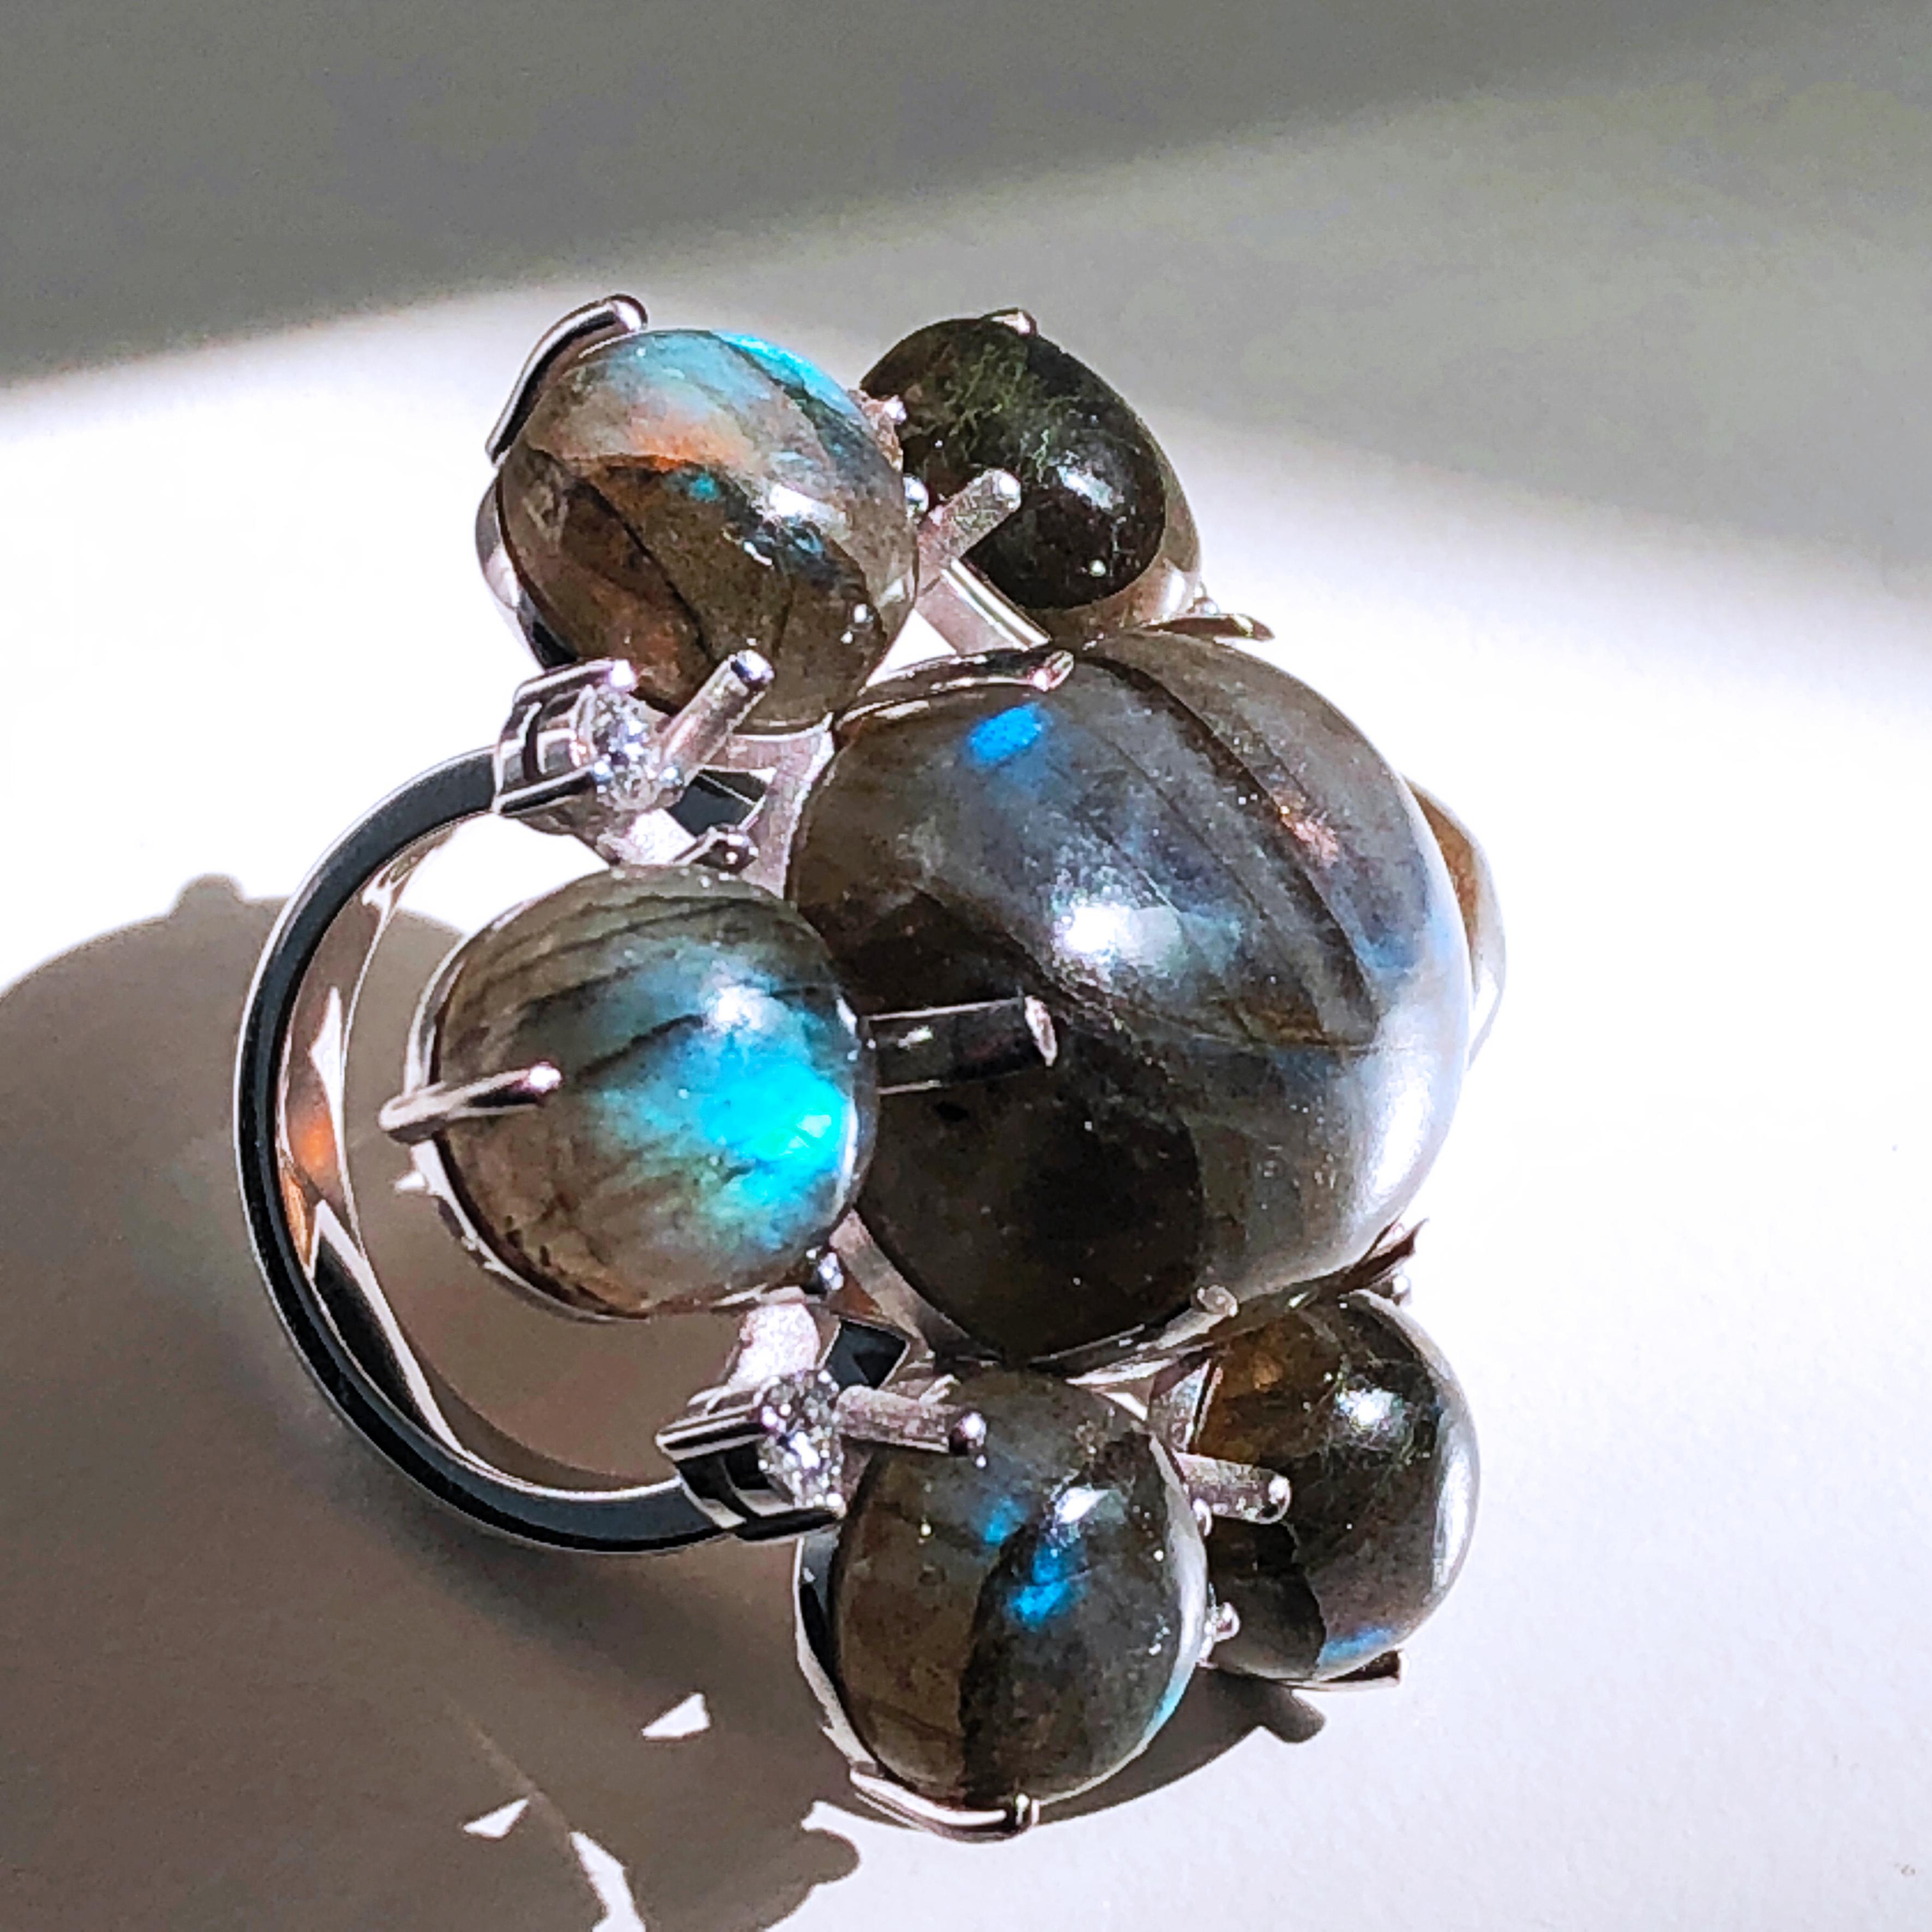 One-of-a-Kind 55.20 Carat Labradorite White Diamond Peacock Blue Cocktail Ring 6